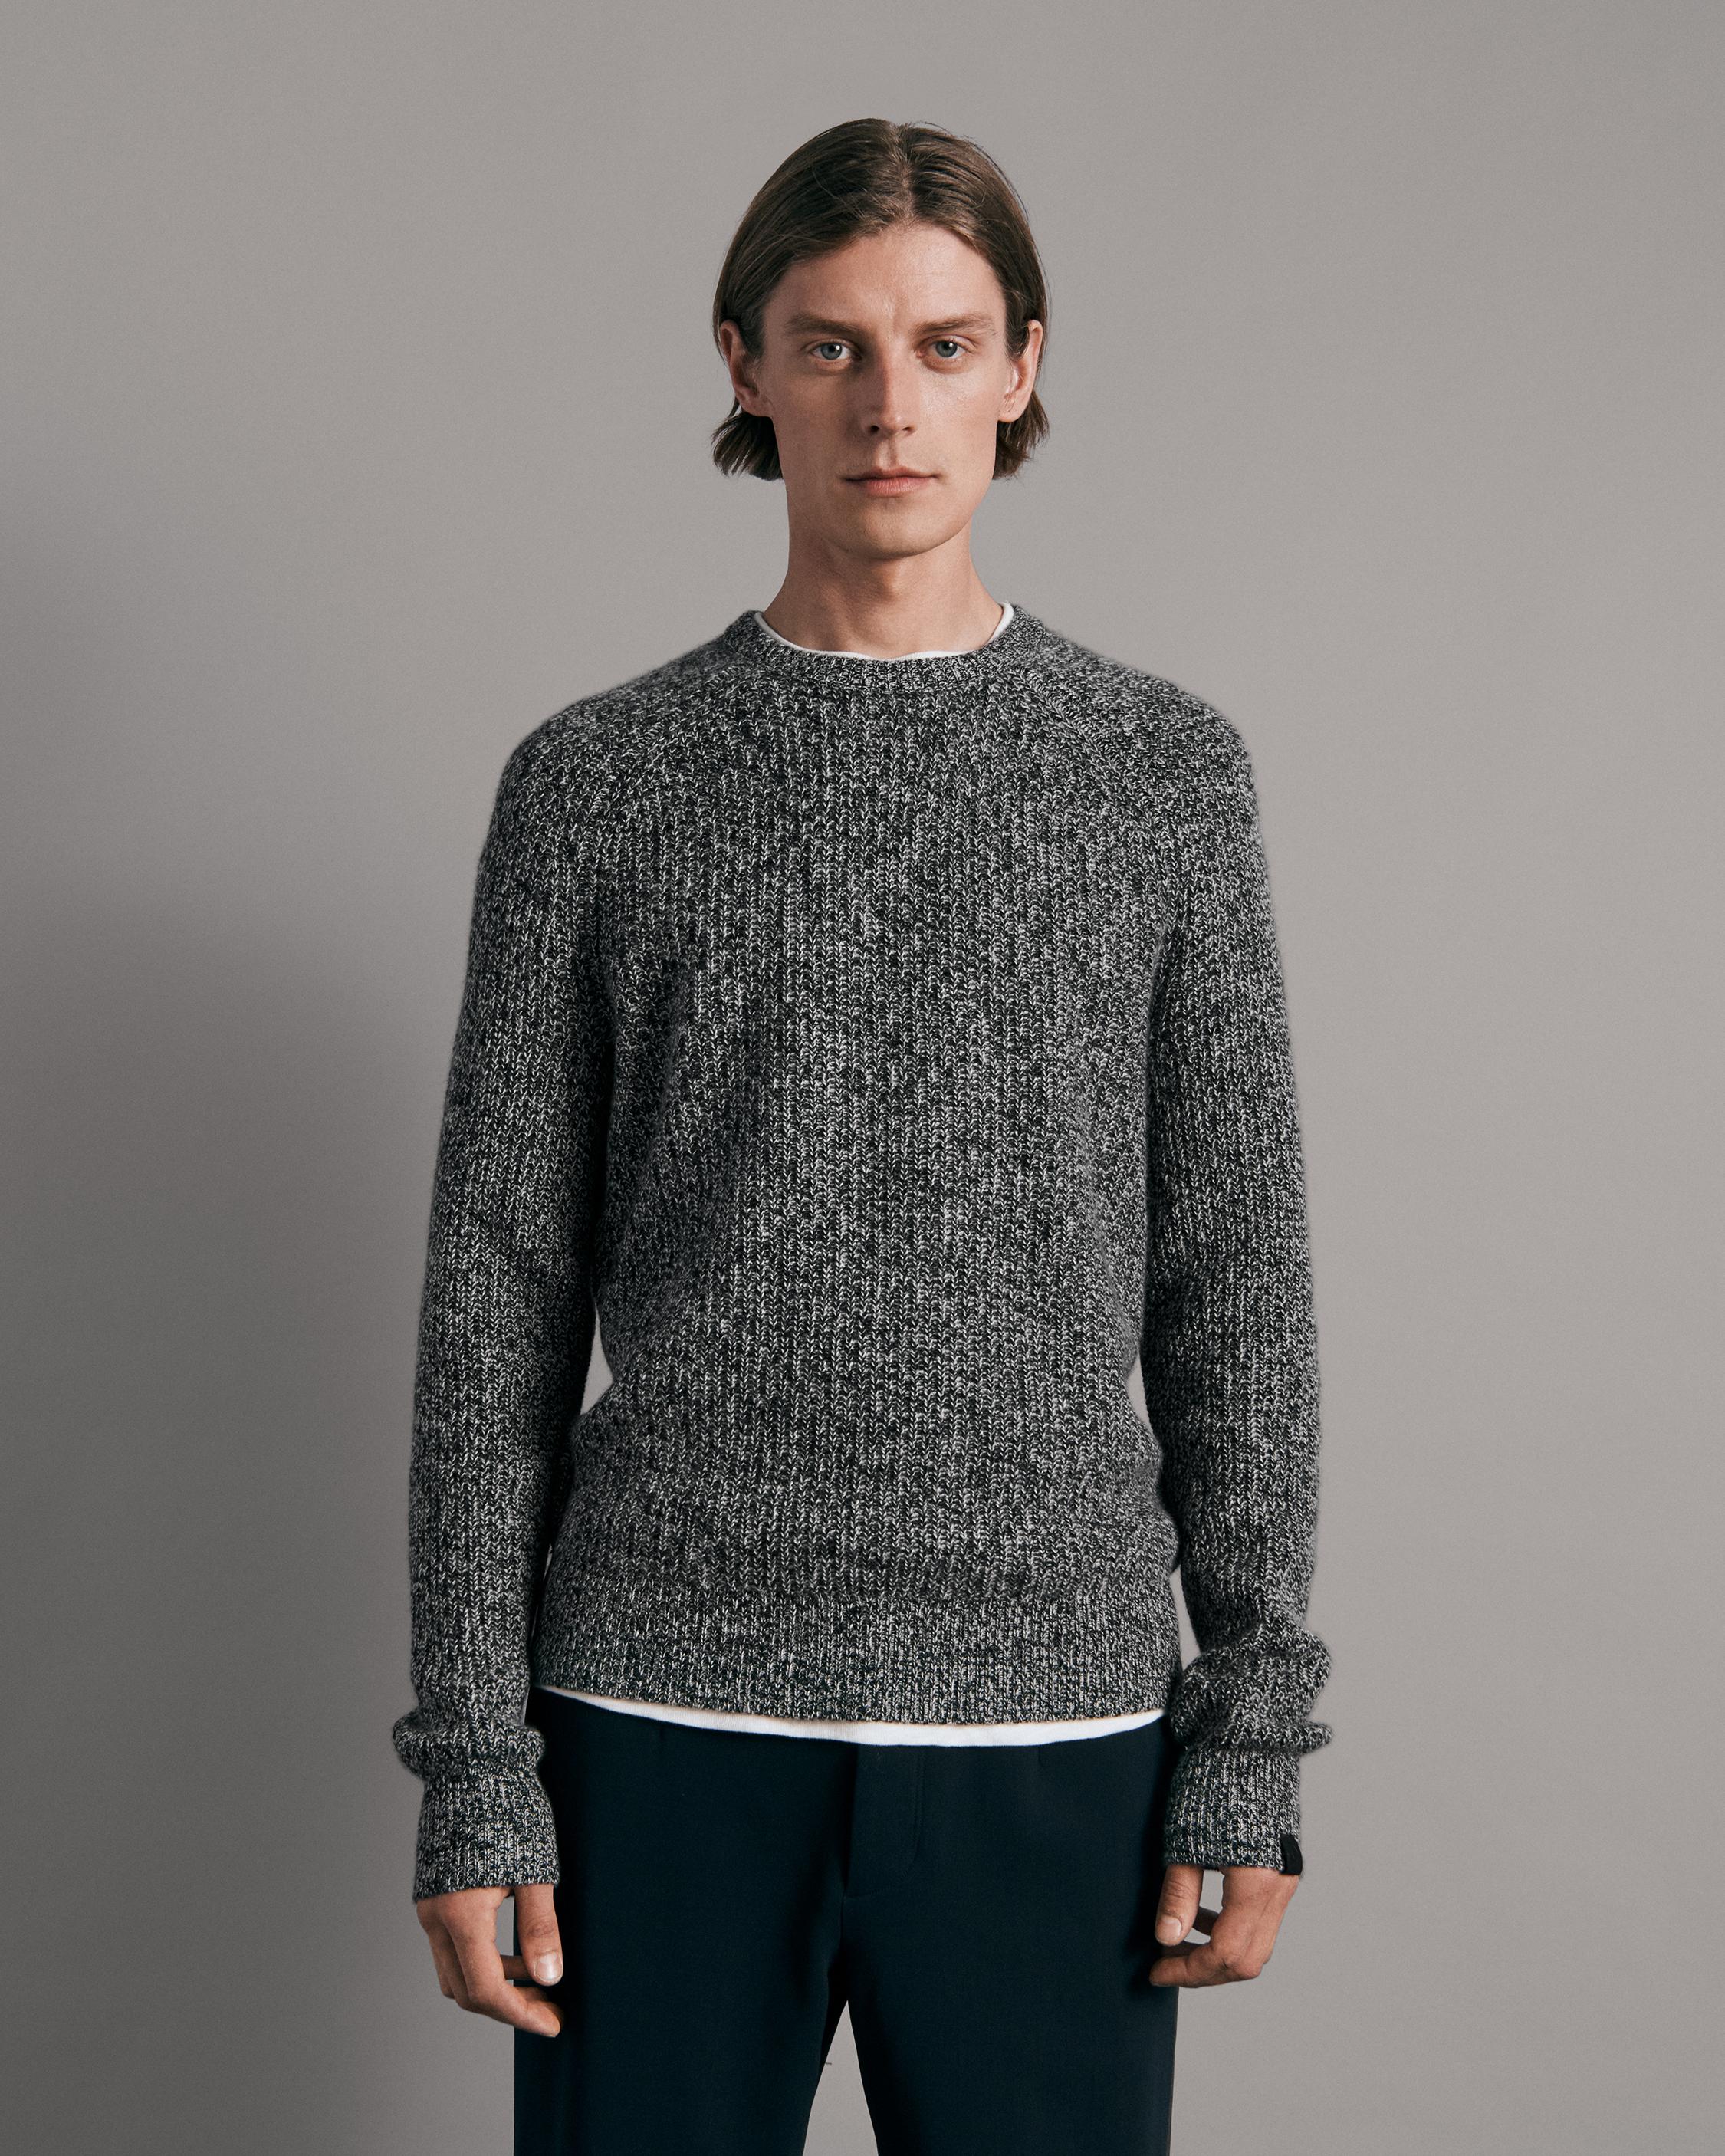 Men's Clothing & Accessories With Urban Style | rag & bone